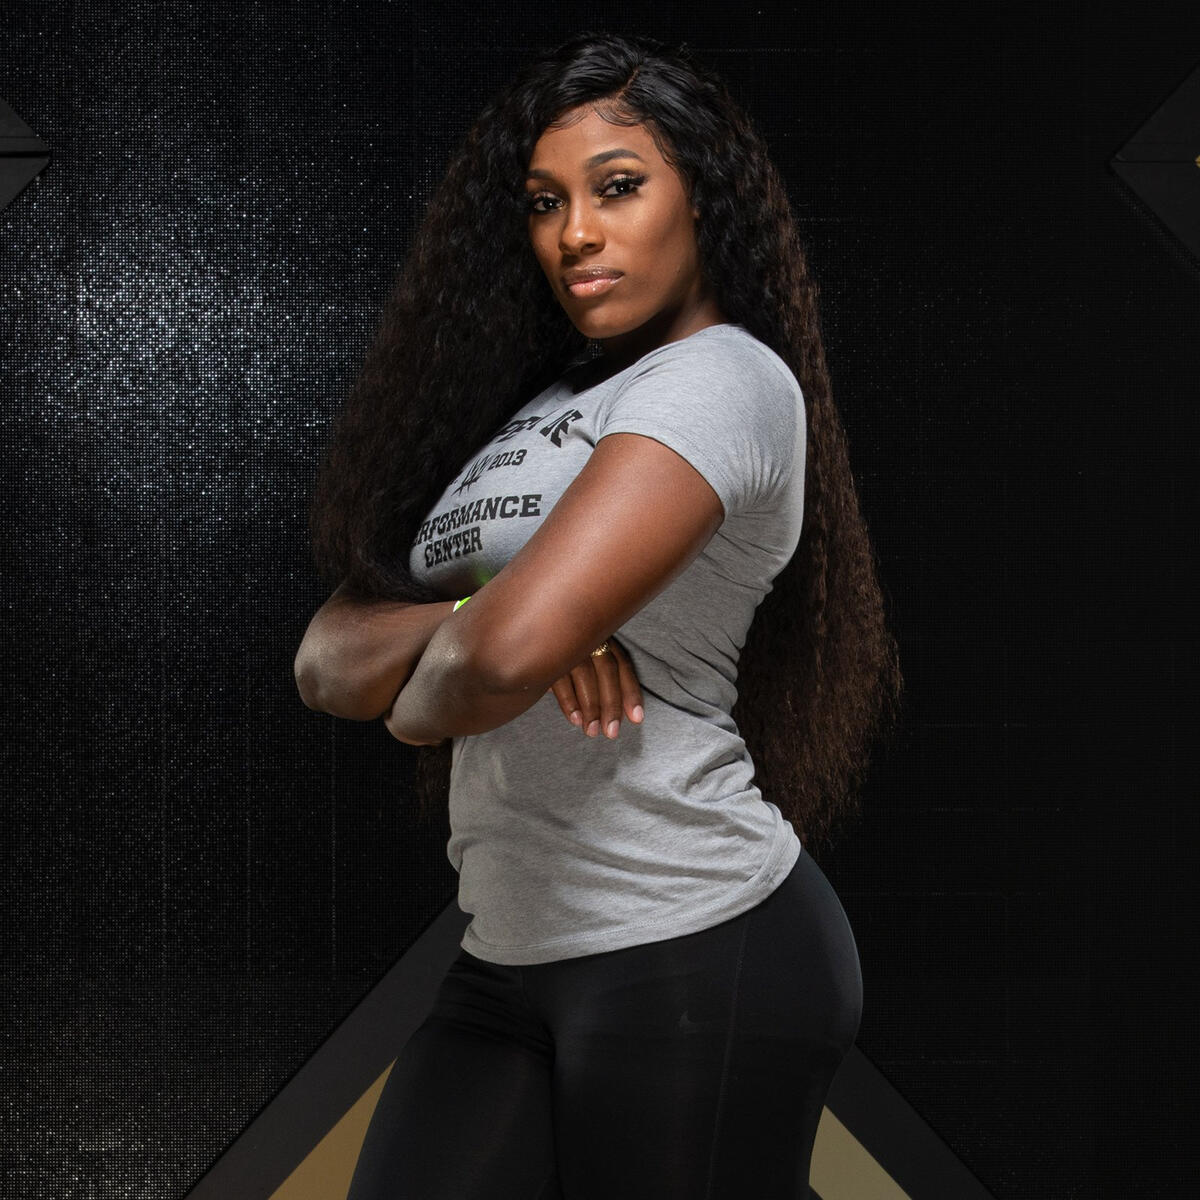 Anriel Howard aka Lash Legend at the WWE Performance Center in 2020